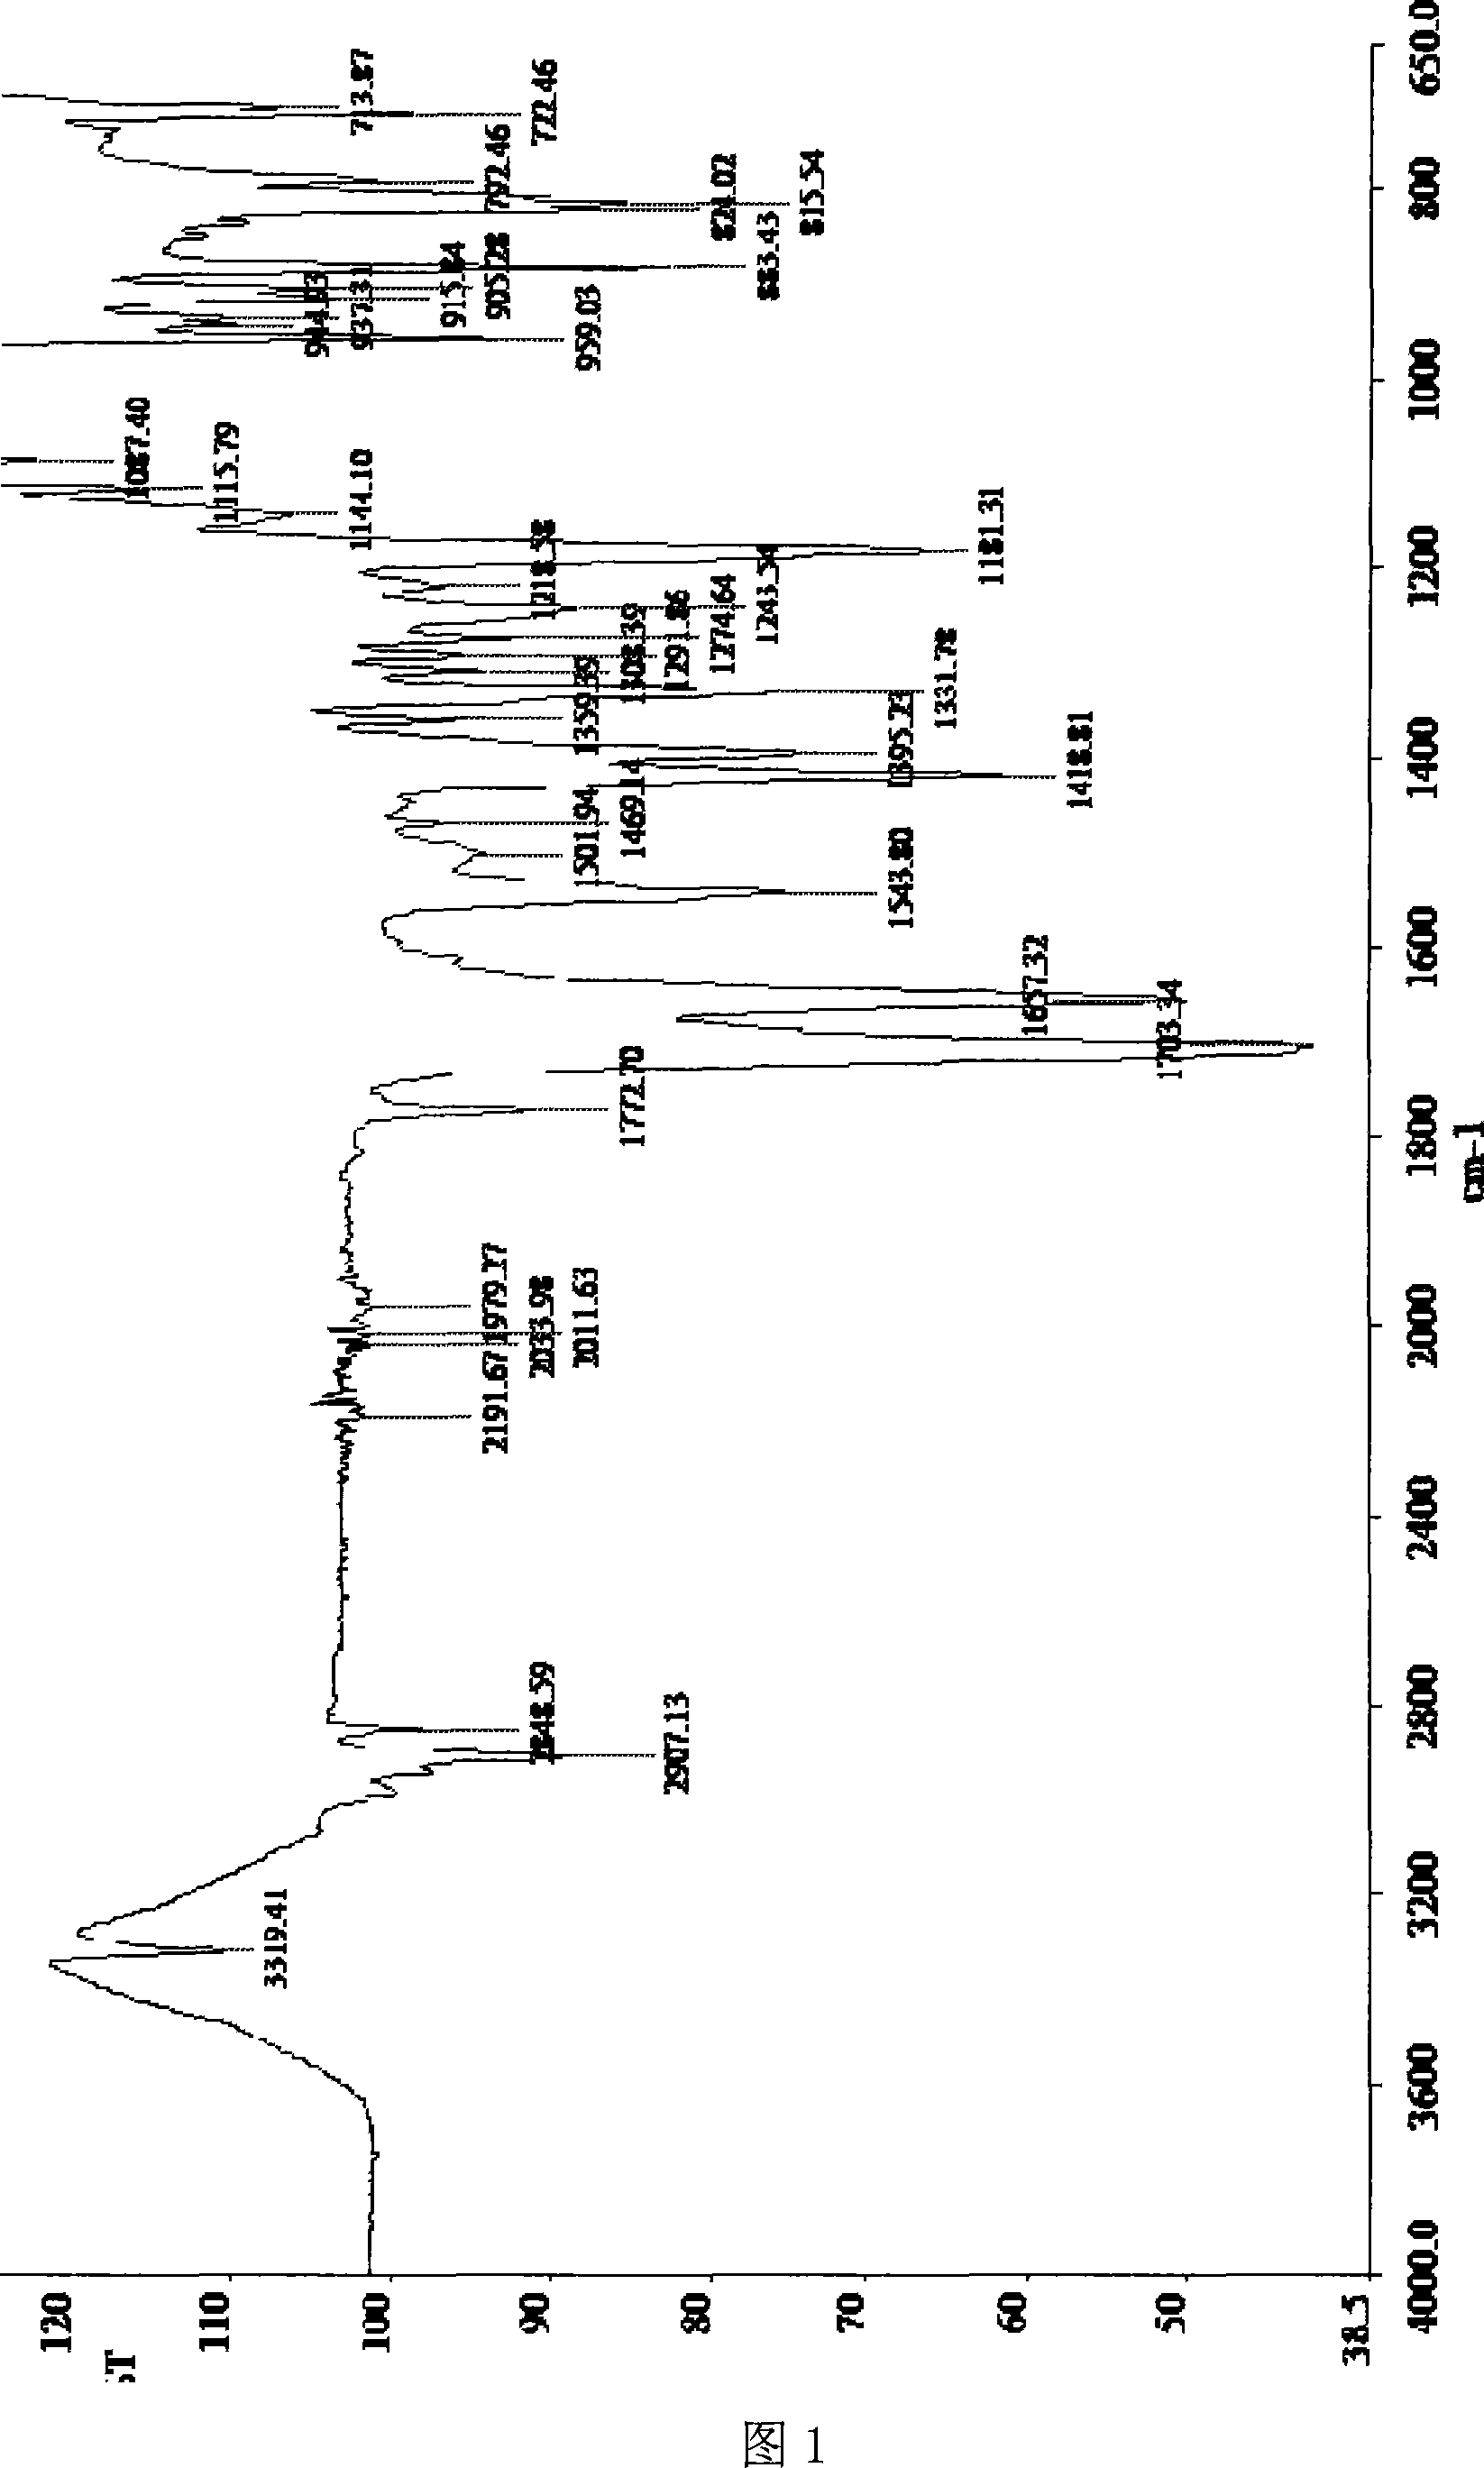 Antineoplastic active canthardin derivative and method for preparing same